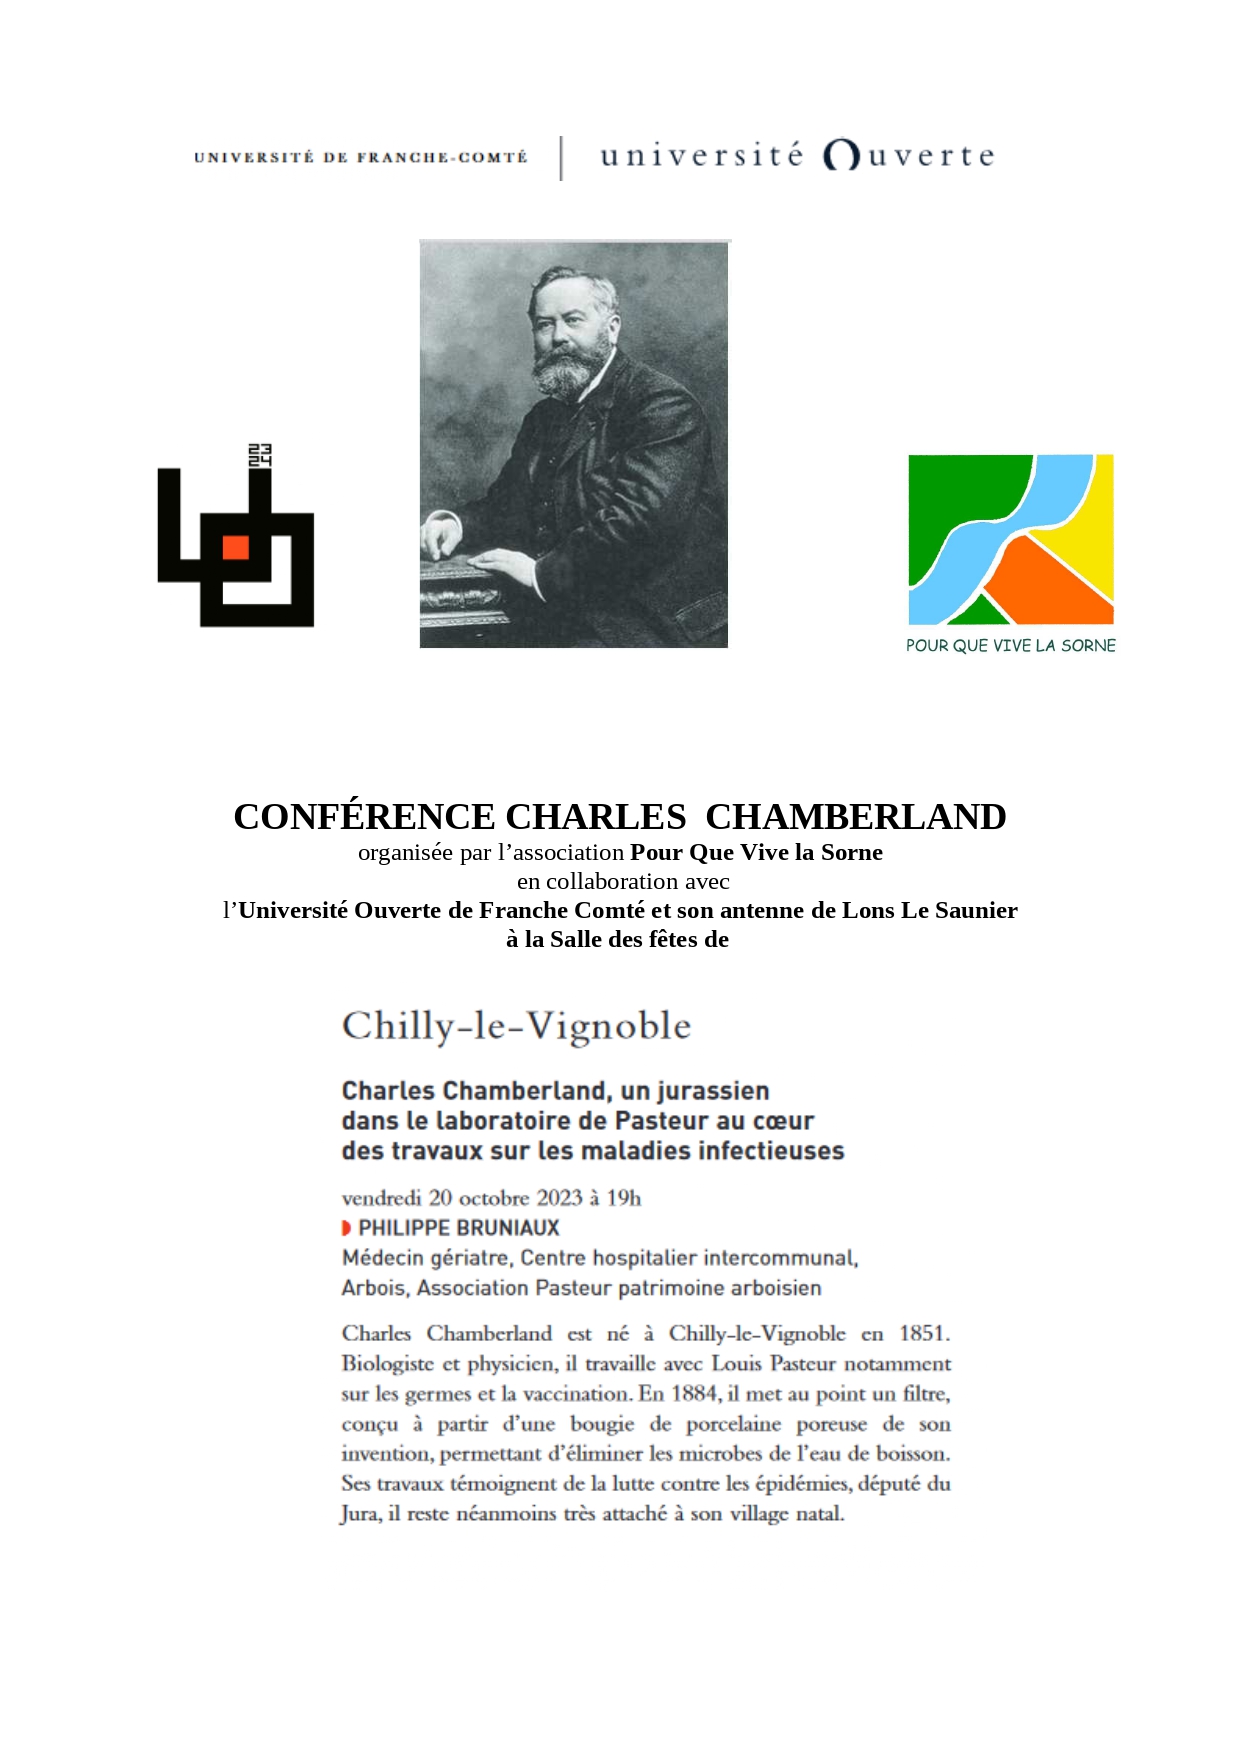 conference Charles Chamberland 20 octobre 2023_page-0001.jpg